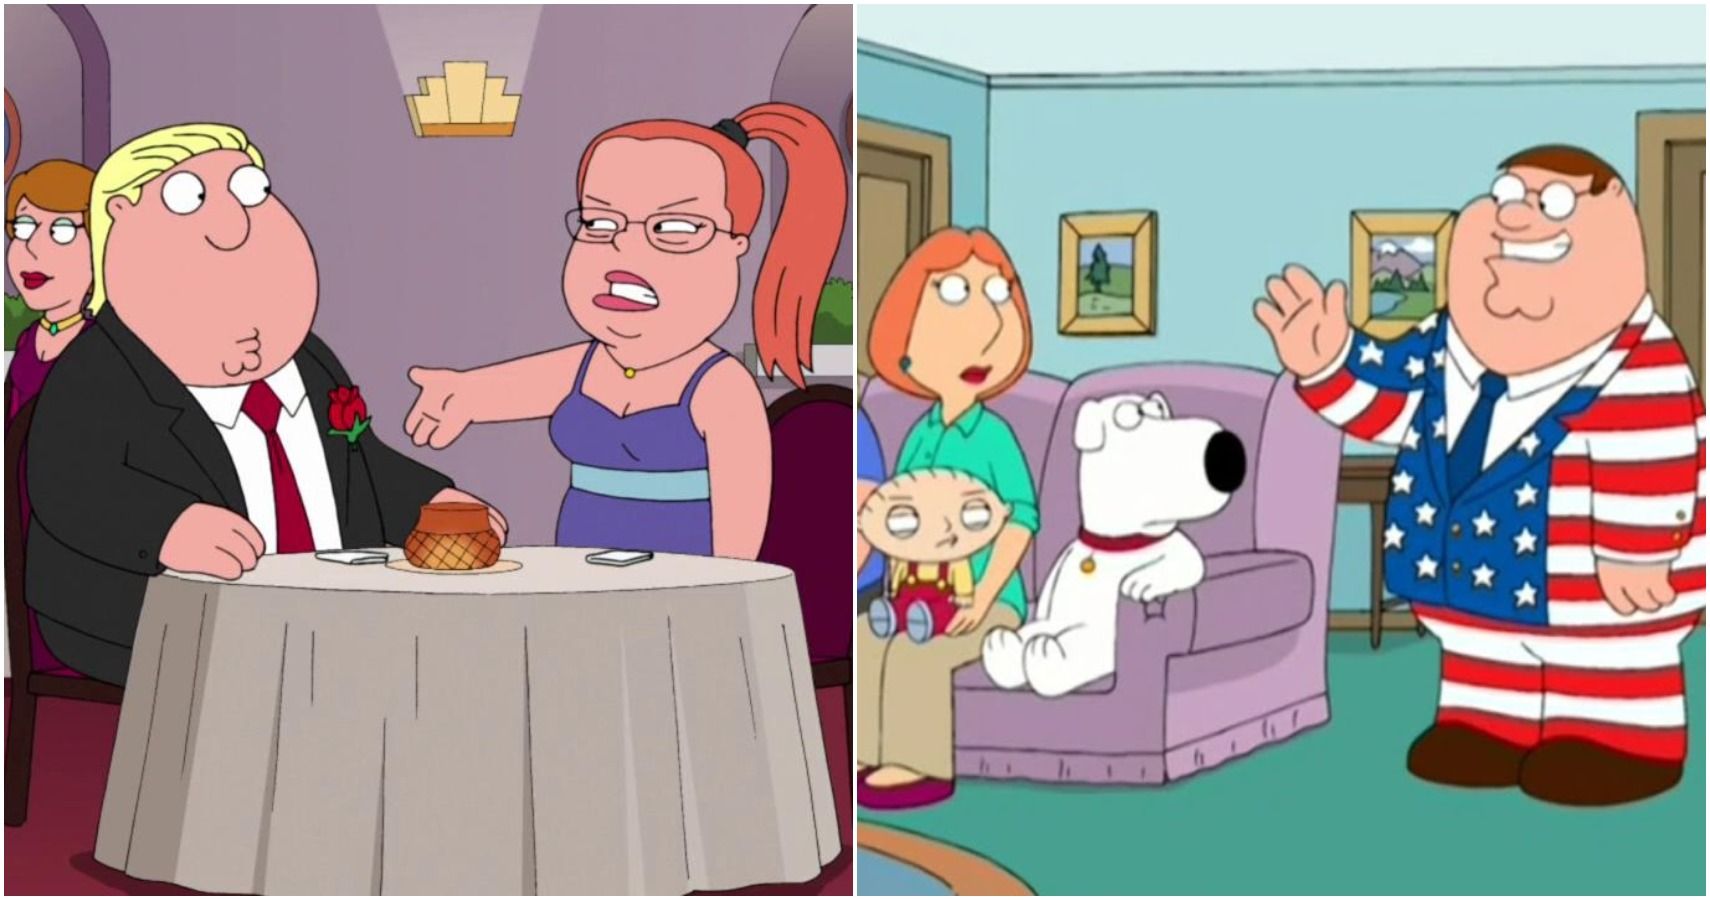 Family Guy seasons ranked from best to worst